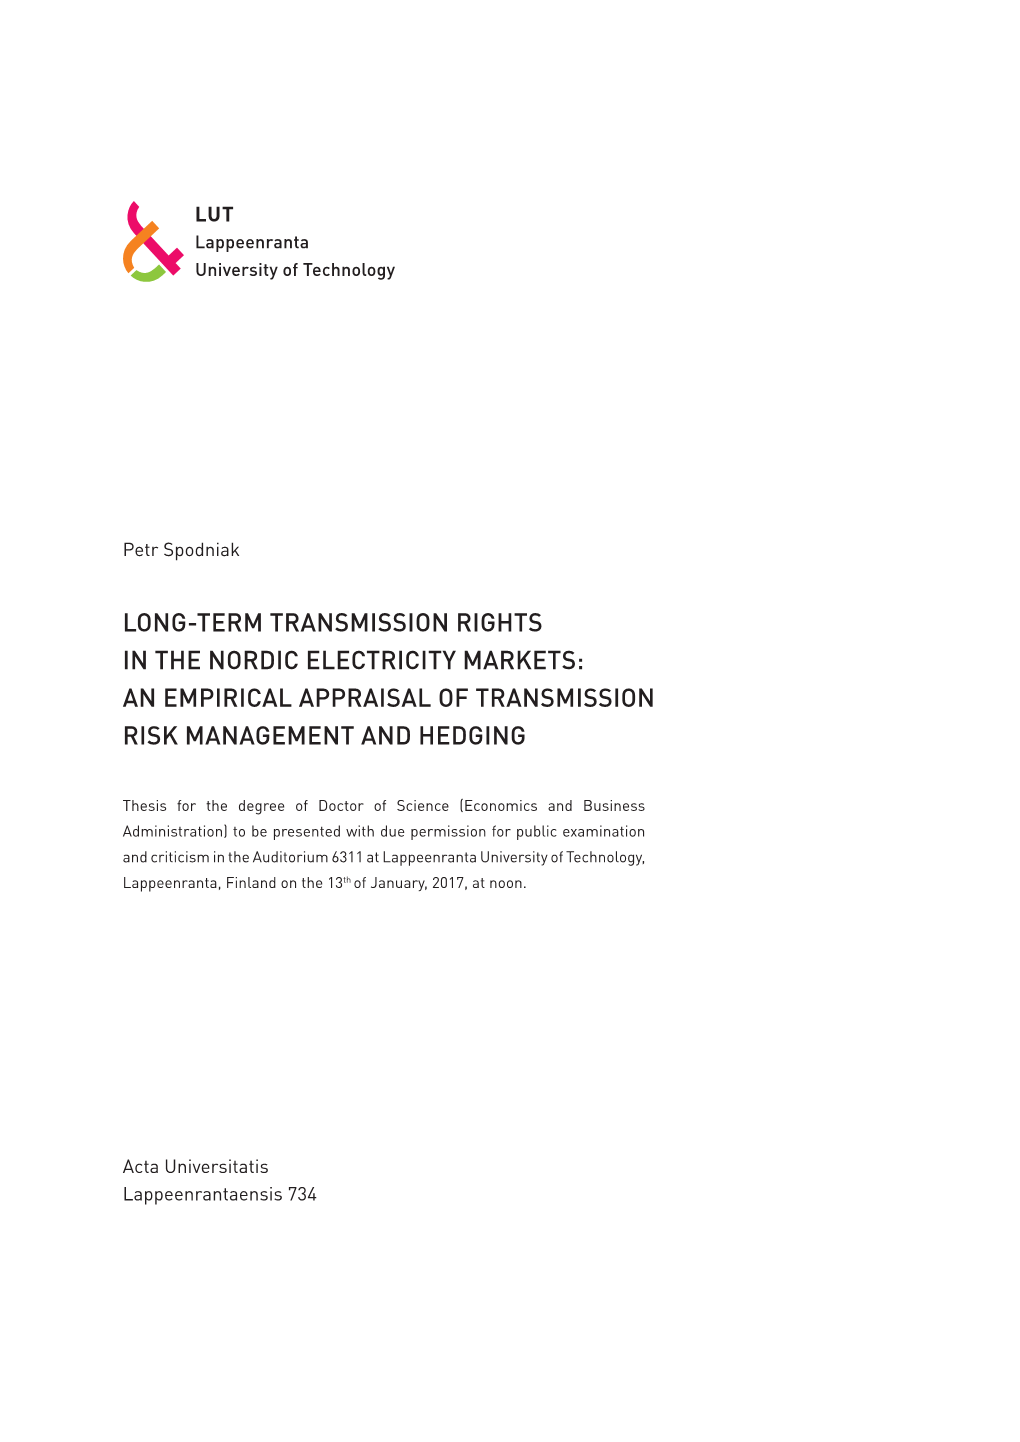 Long-Term Transmission Rights in the Nordic Electricity Markets: an Empirical Appraisal of Transmission Risk Management and Hedging